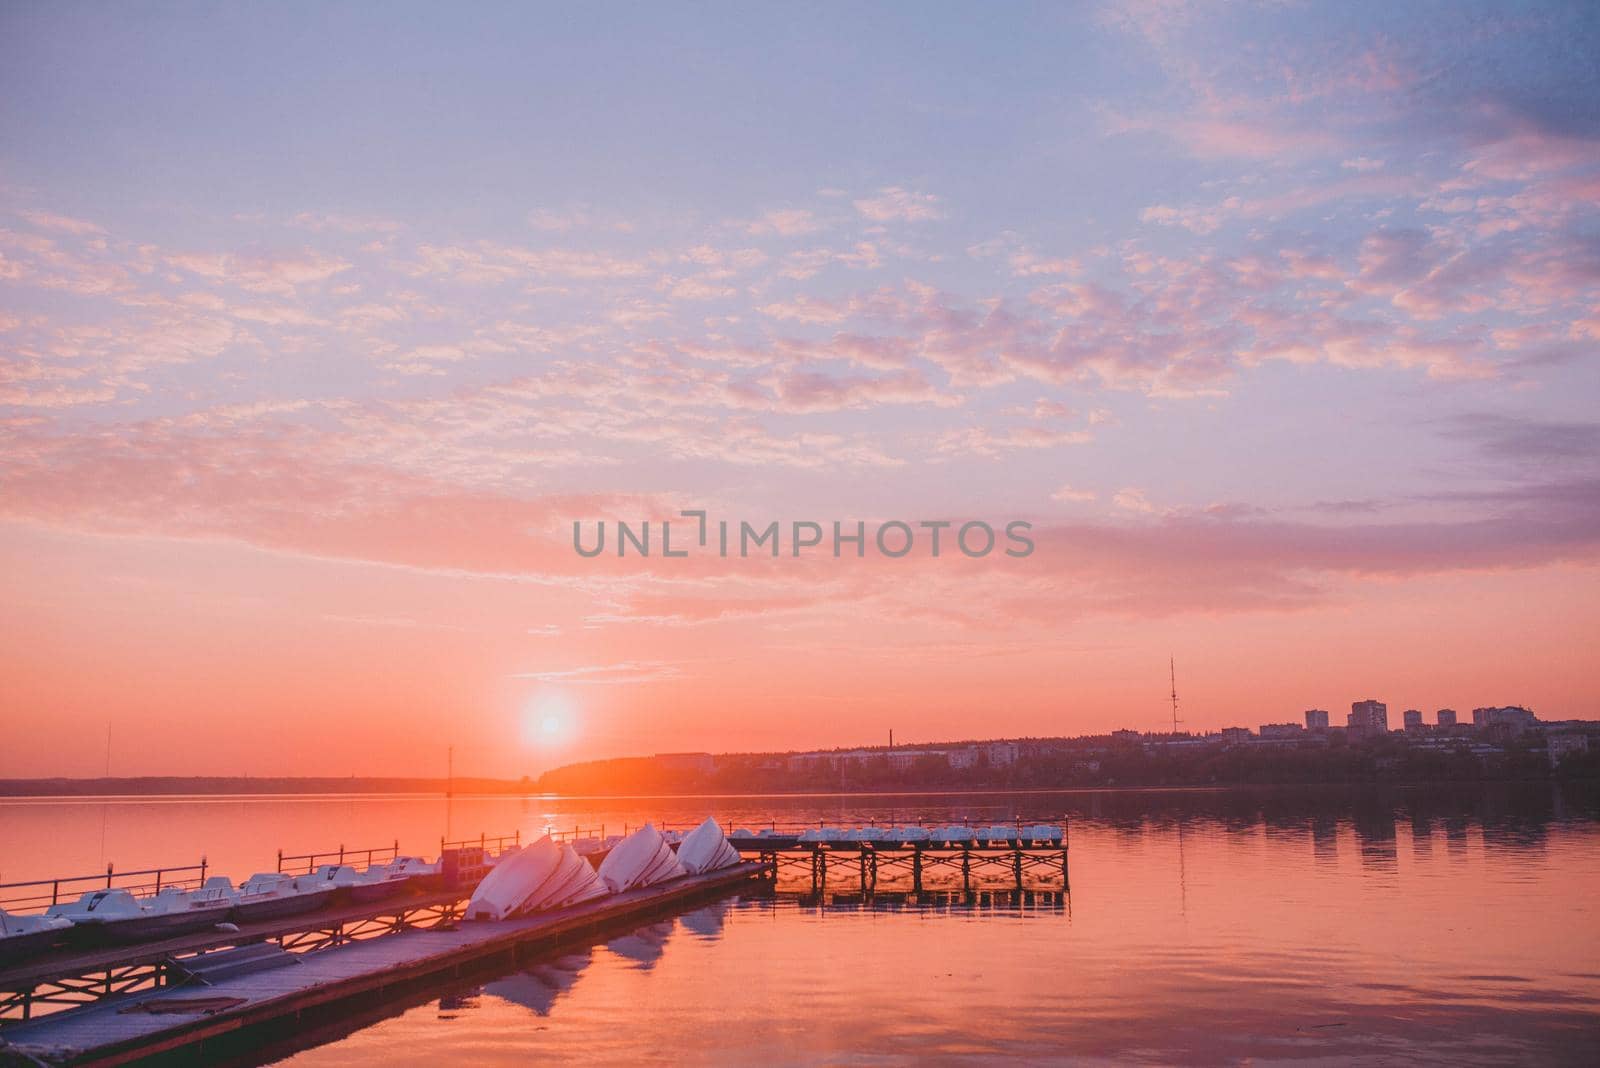 wooden pier with boats at sunset.